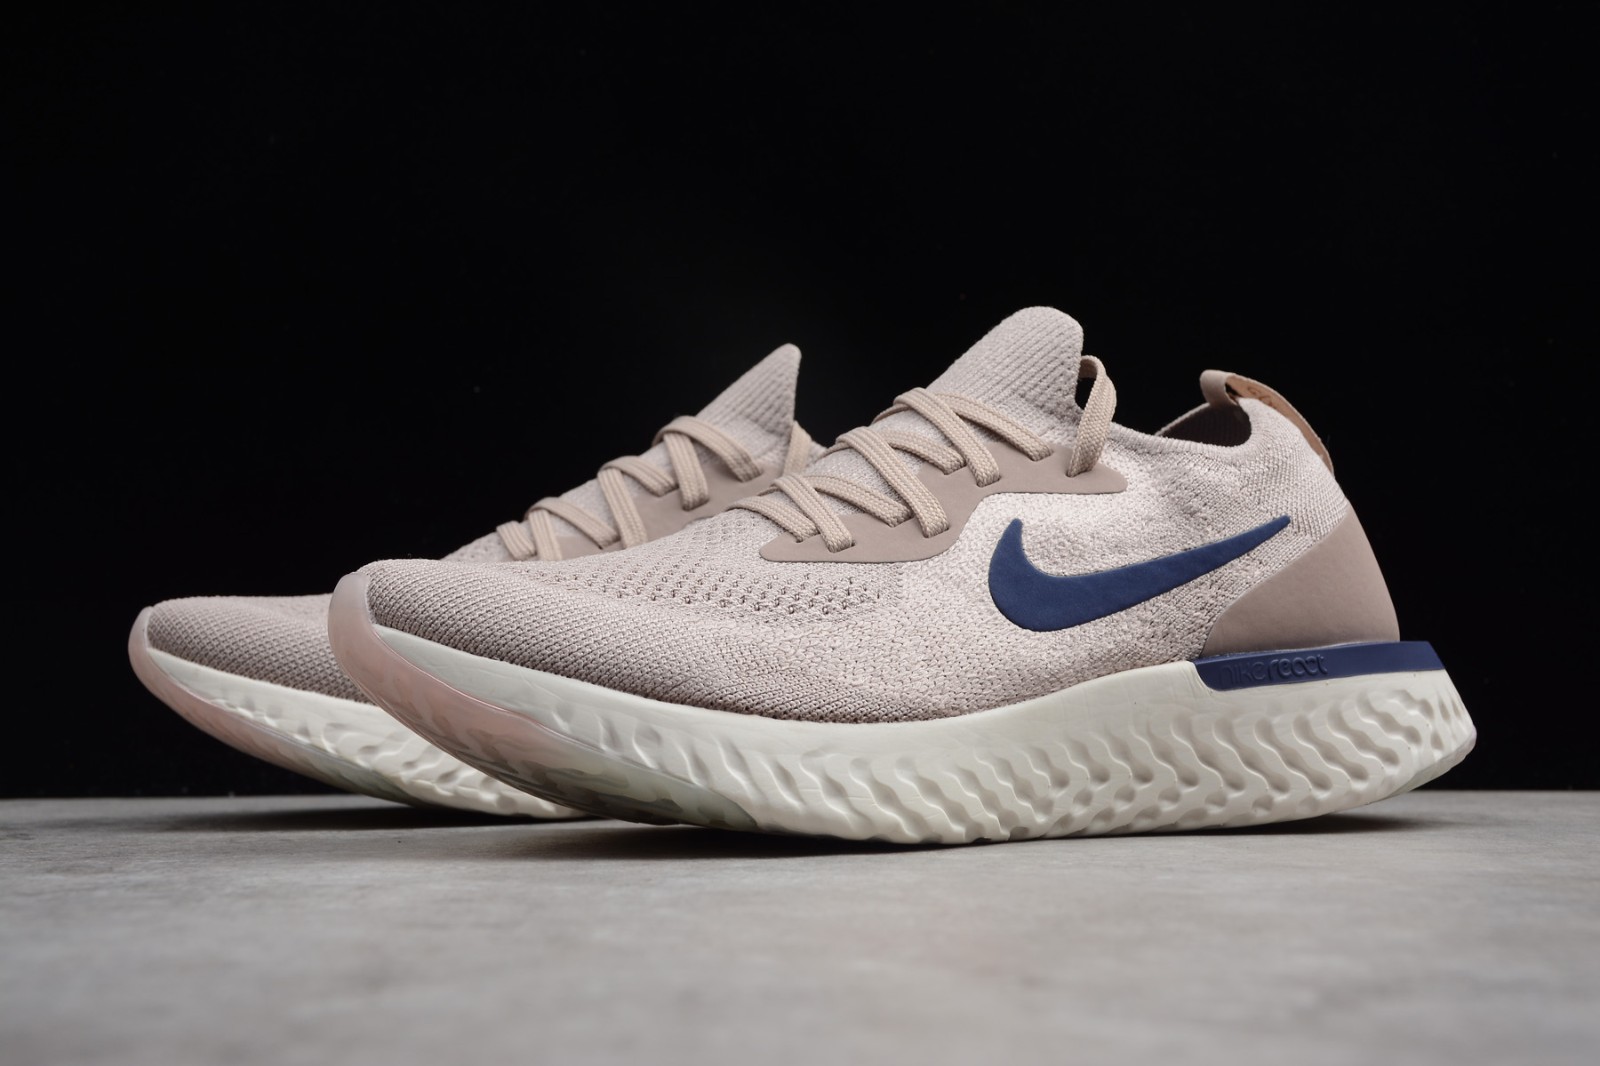 nuez fecha George Hanbury Nike Epic React Diffused Taupe Blue Void Running Shoes AQ0067 201 - Here is  a breakdown of the main features of the shoes and images courtesy of JD  Sports - MultiscaleconsultingShops